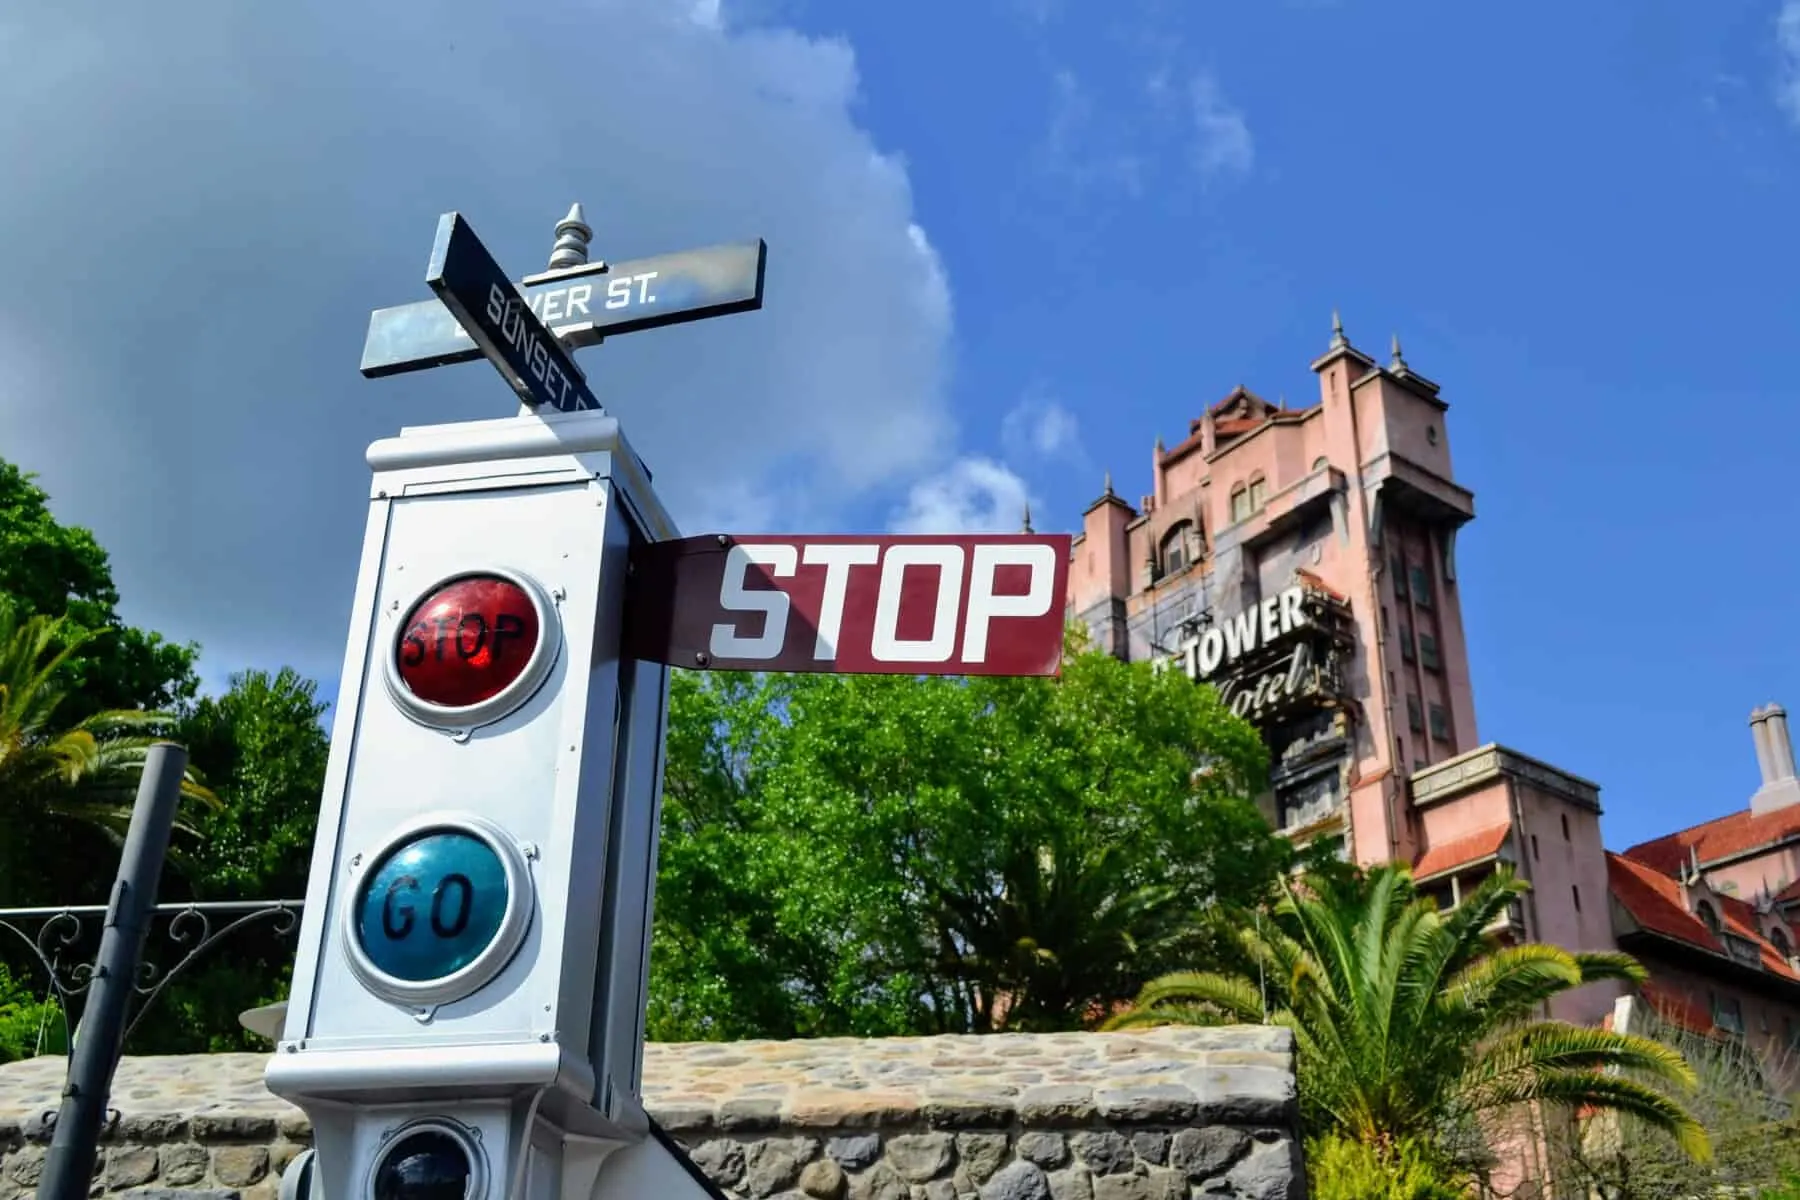 10 Secrets of Hollywood Studios That May Surprise You